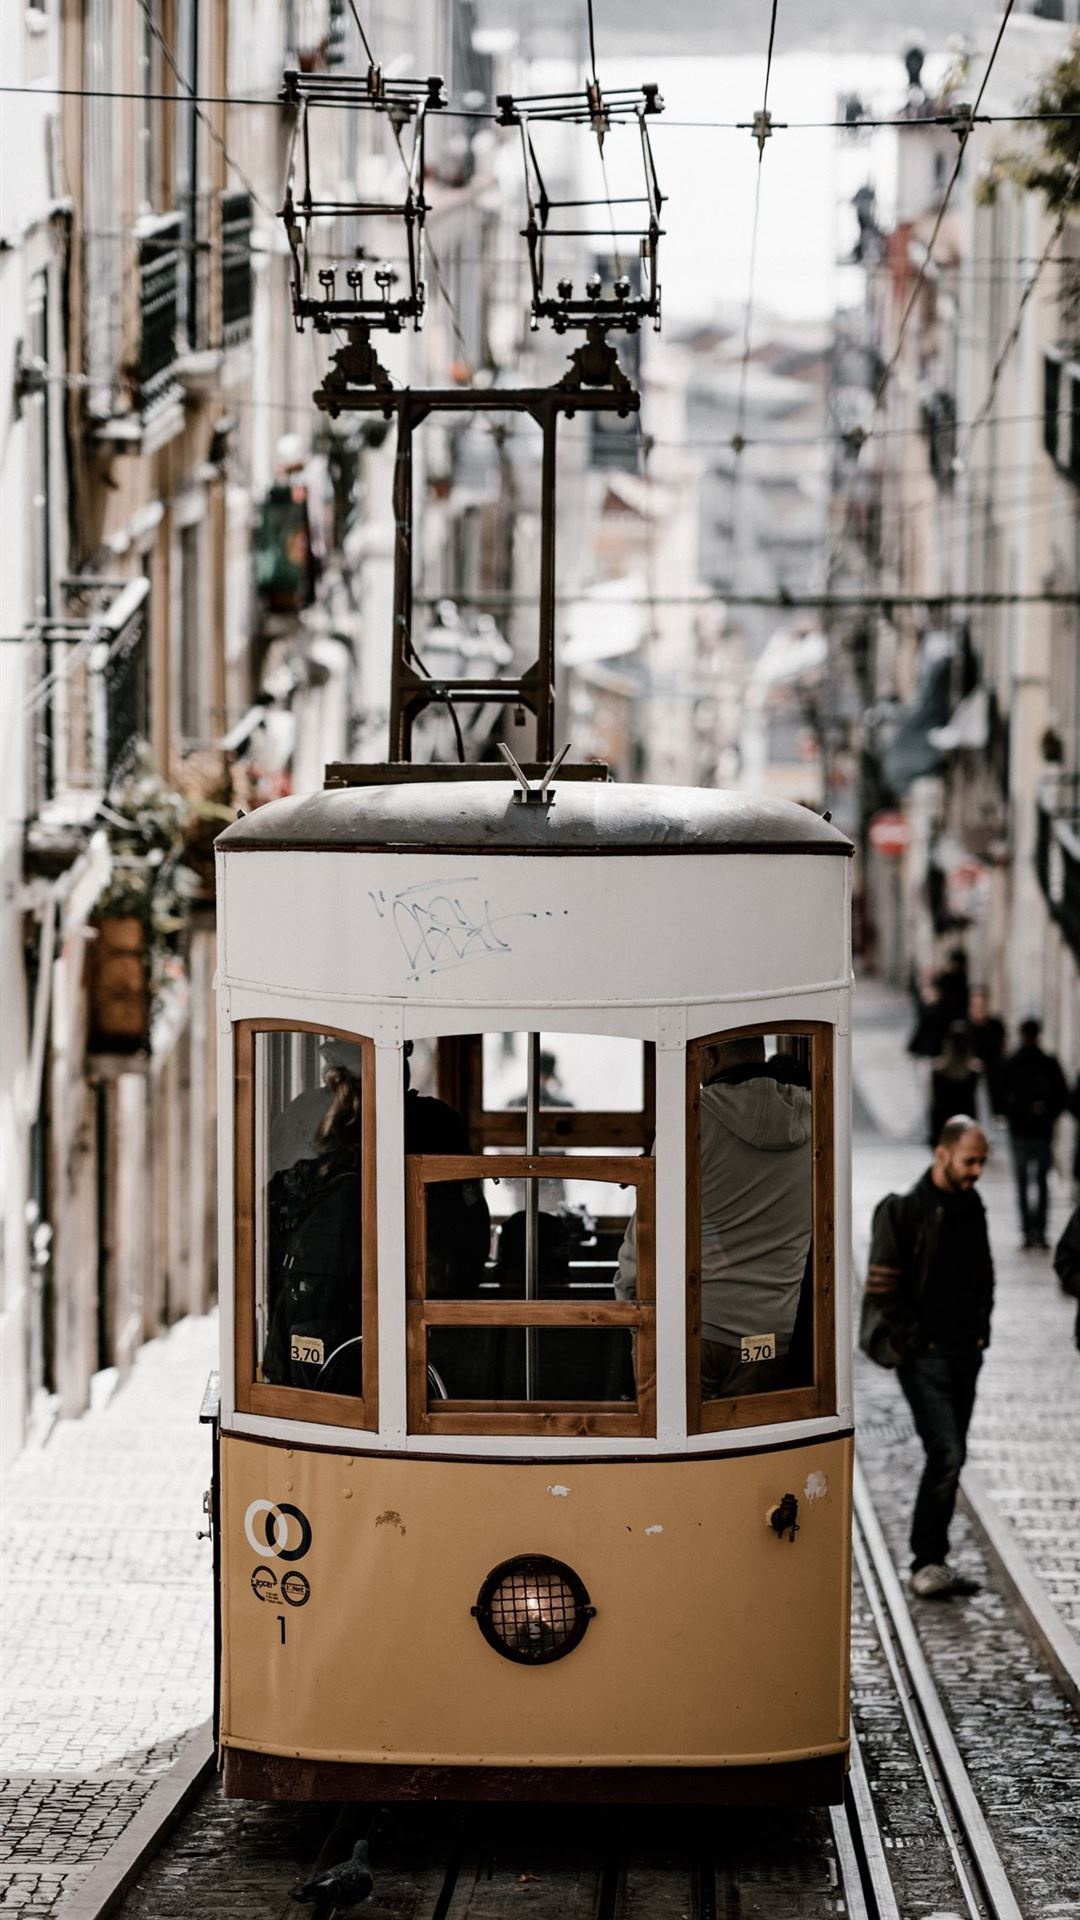 Lisbon attractions, Travel recommendations, Sightseeing guide, Free download, 1080x1920 Full HD Phone